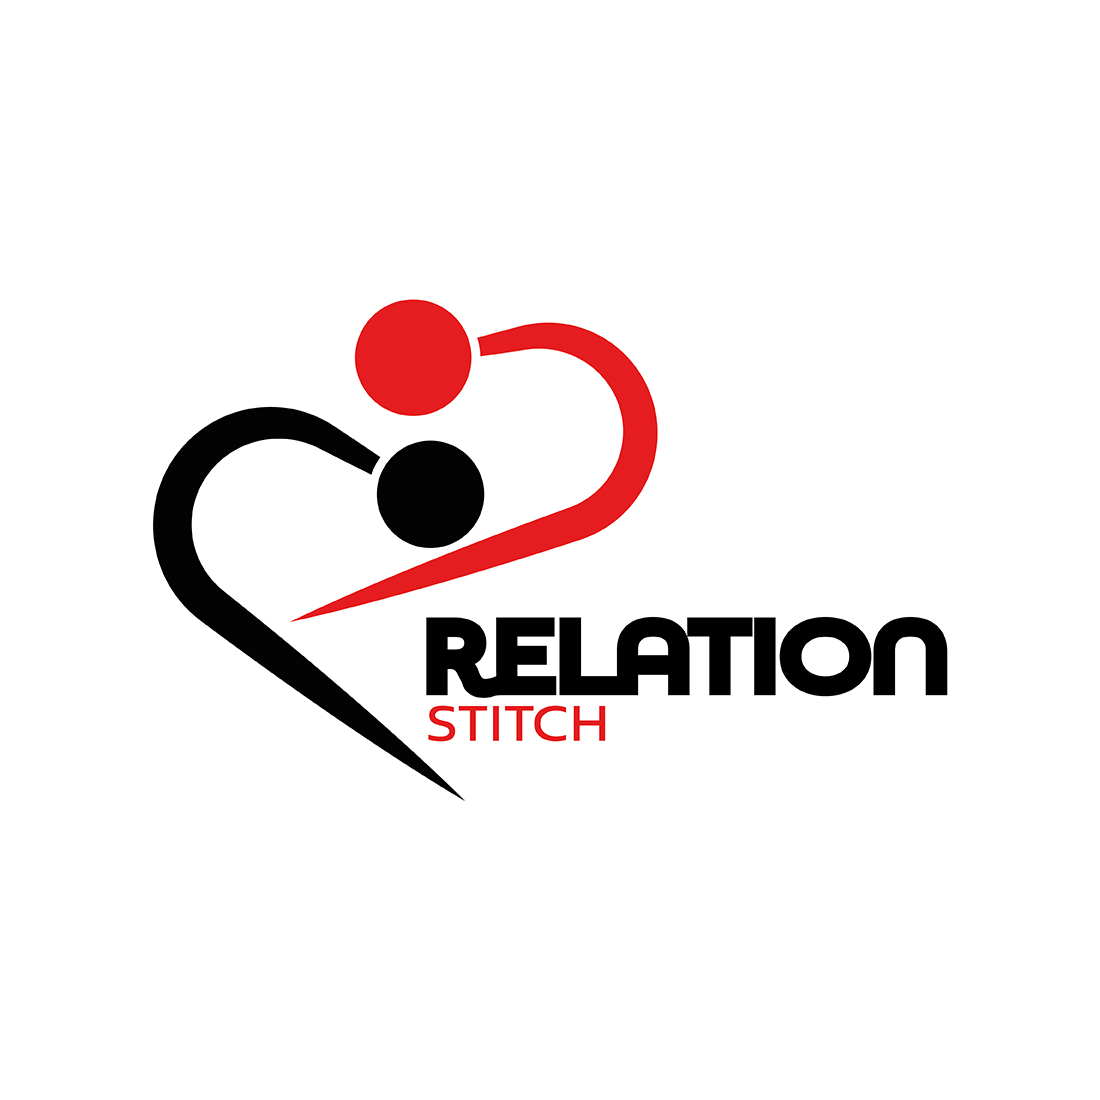 Relational Heart with Community Logo Design cover image.